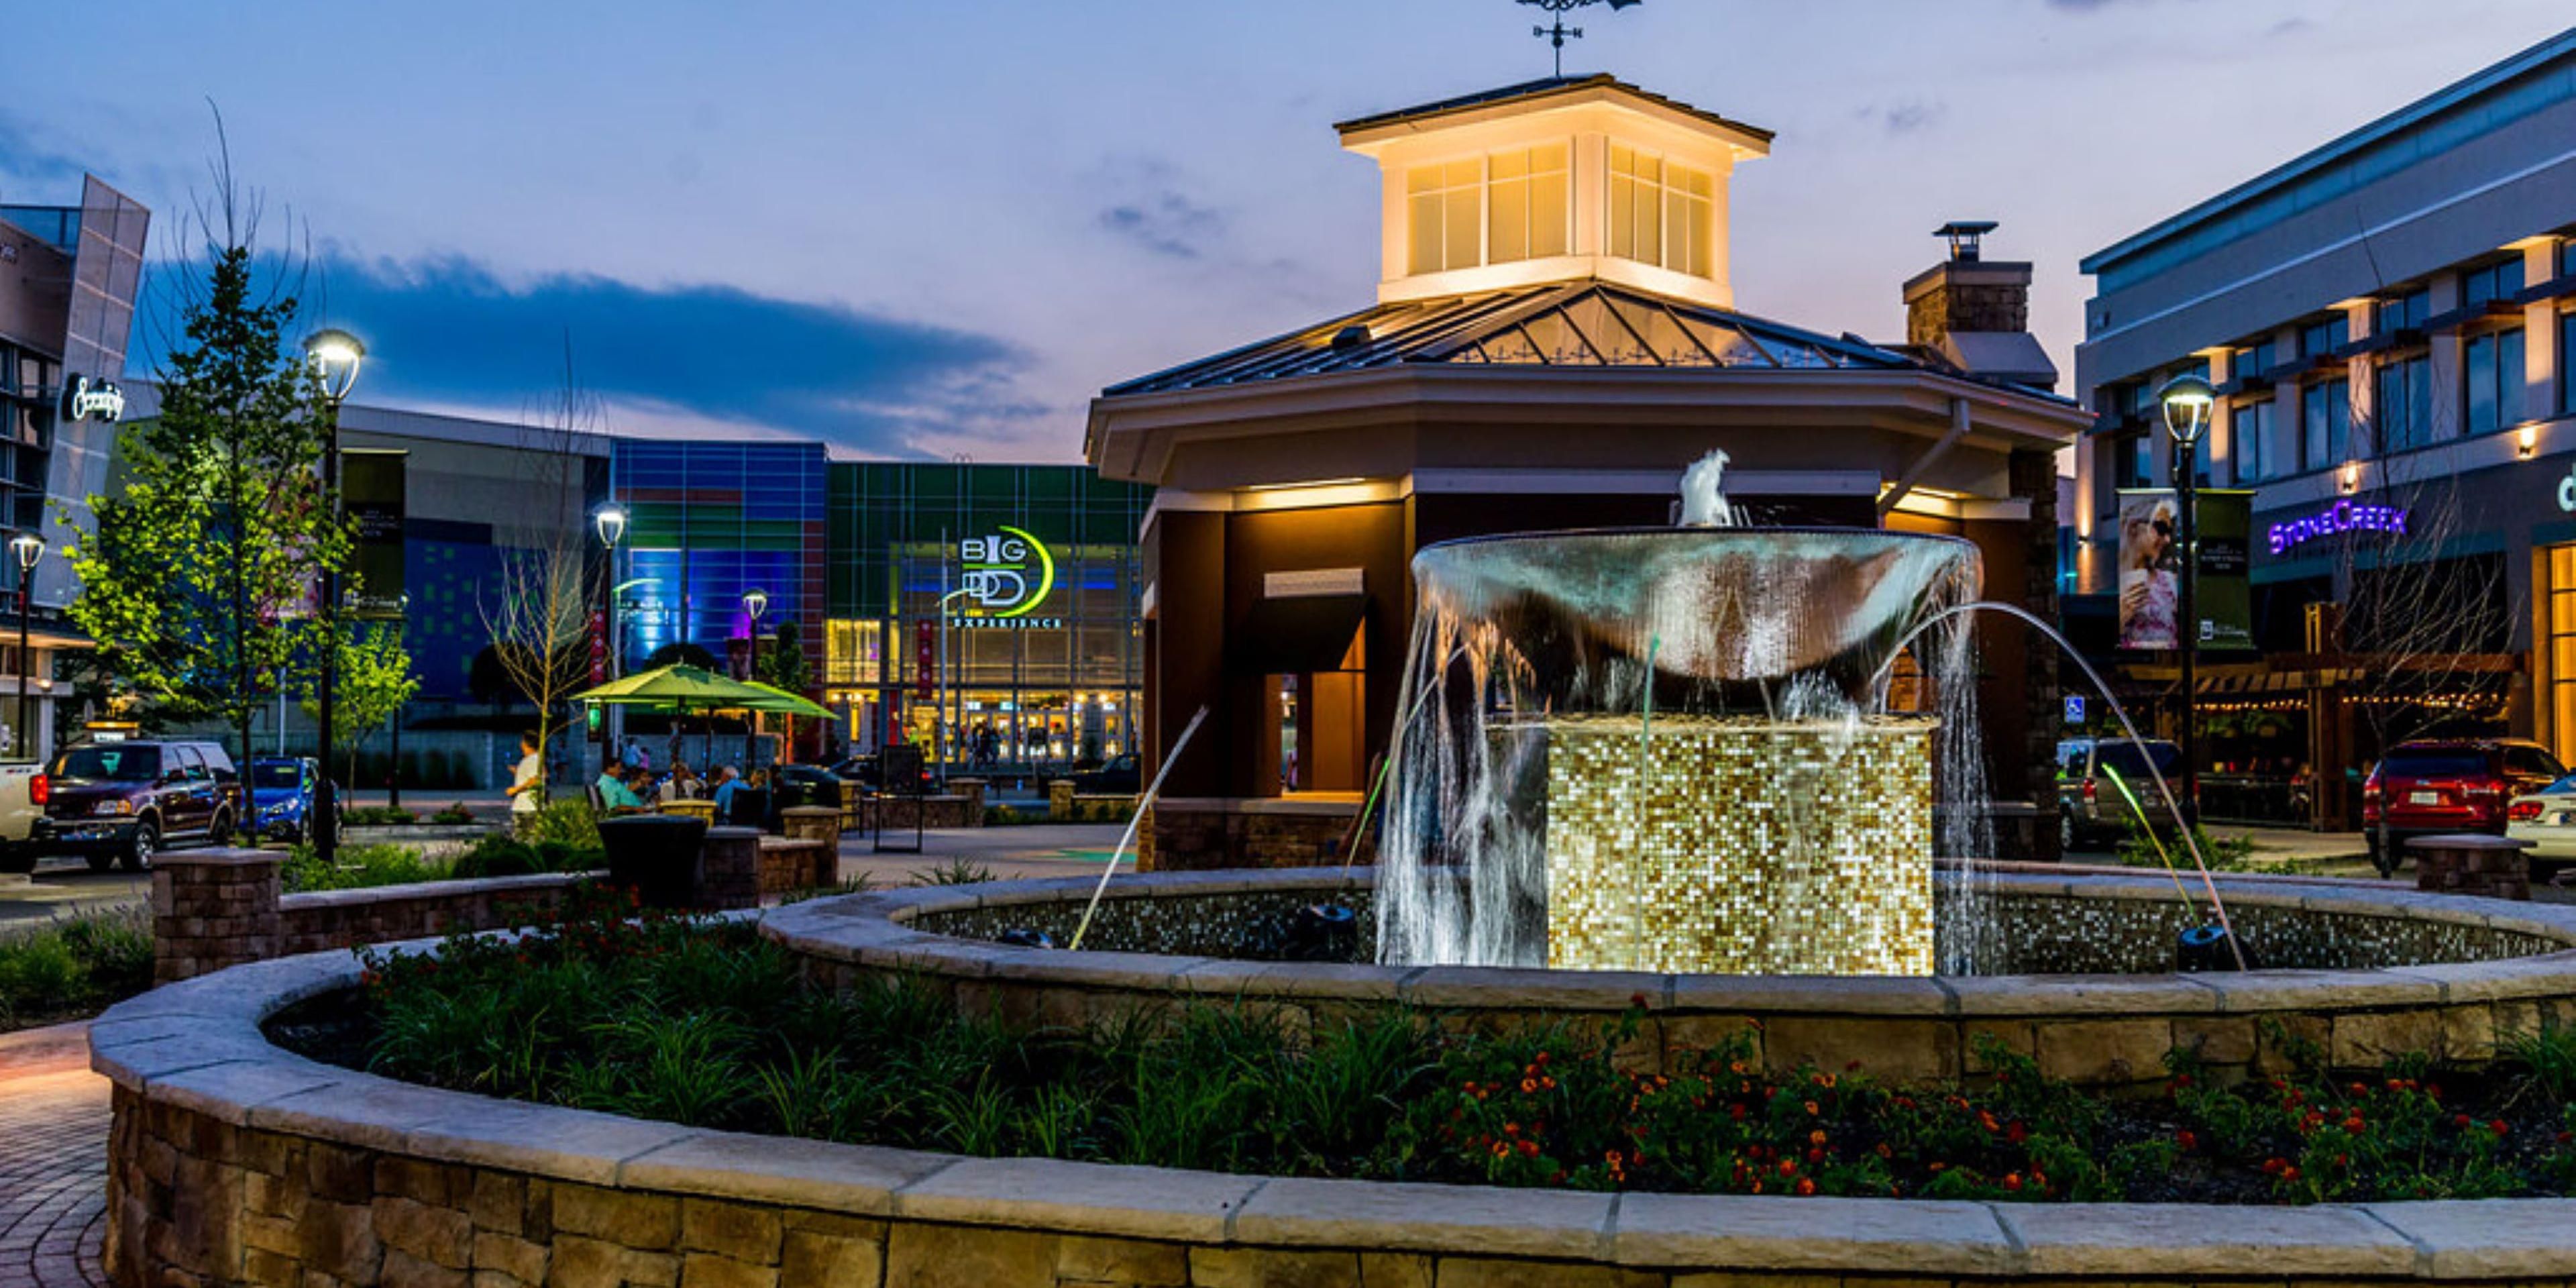 Perry Crossing is your shopping, dining and entertainment destination and is conveniently located just off I-70 and Ronald Reagan Parkway, or US40 and Perry Road in Plainfield.